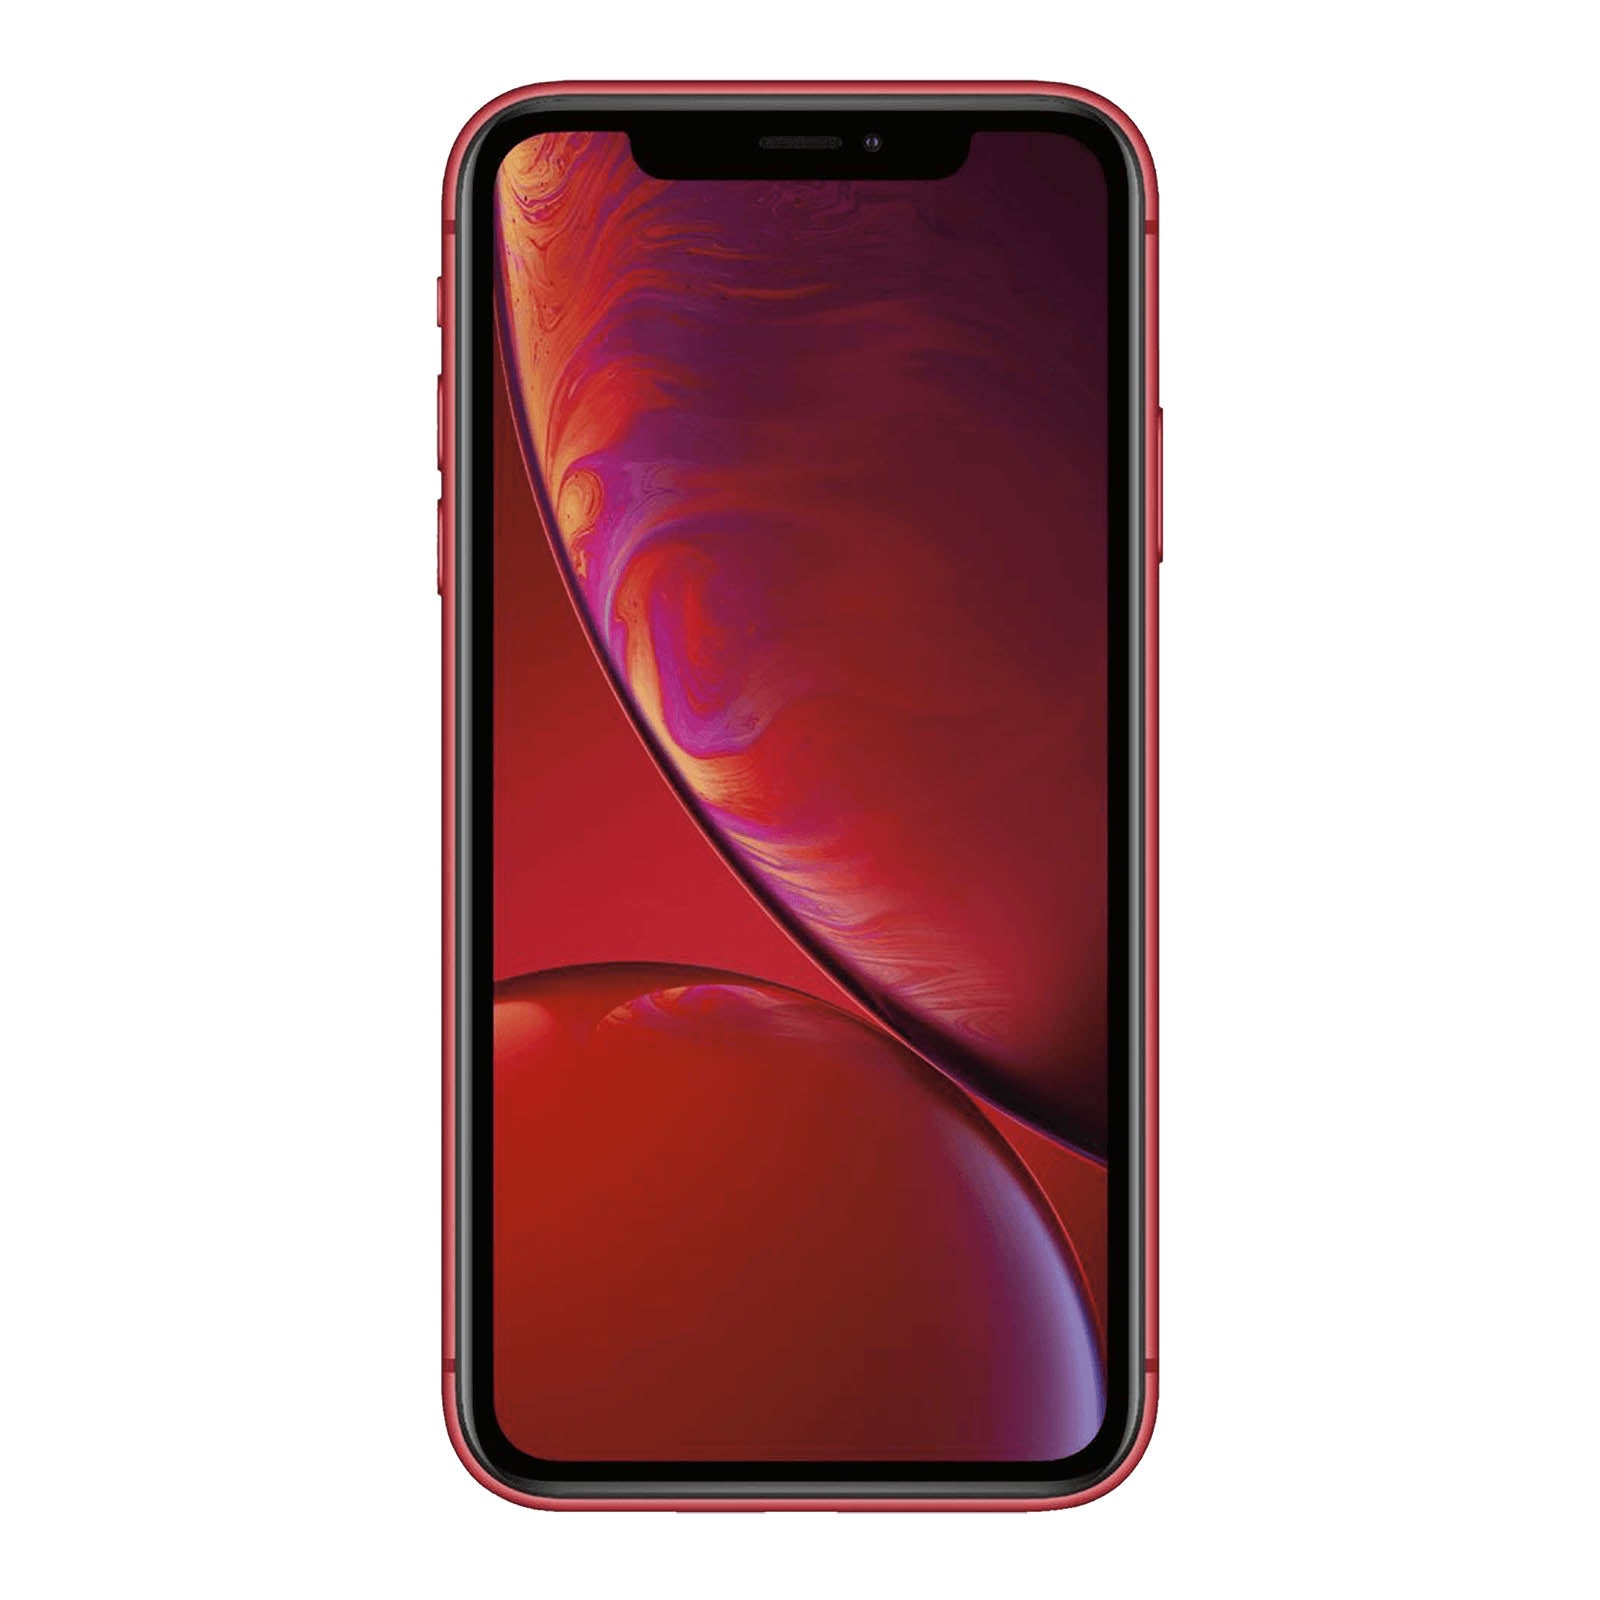 Apple iPhone XR 128GB Product Red Very Good - Unlocked